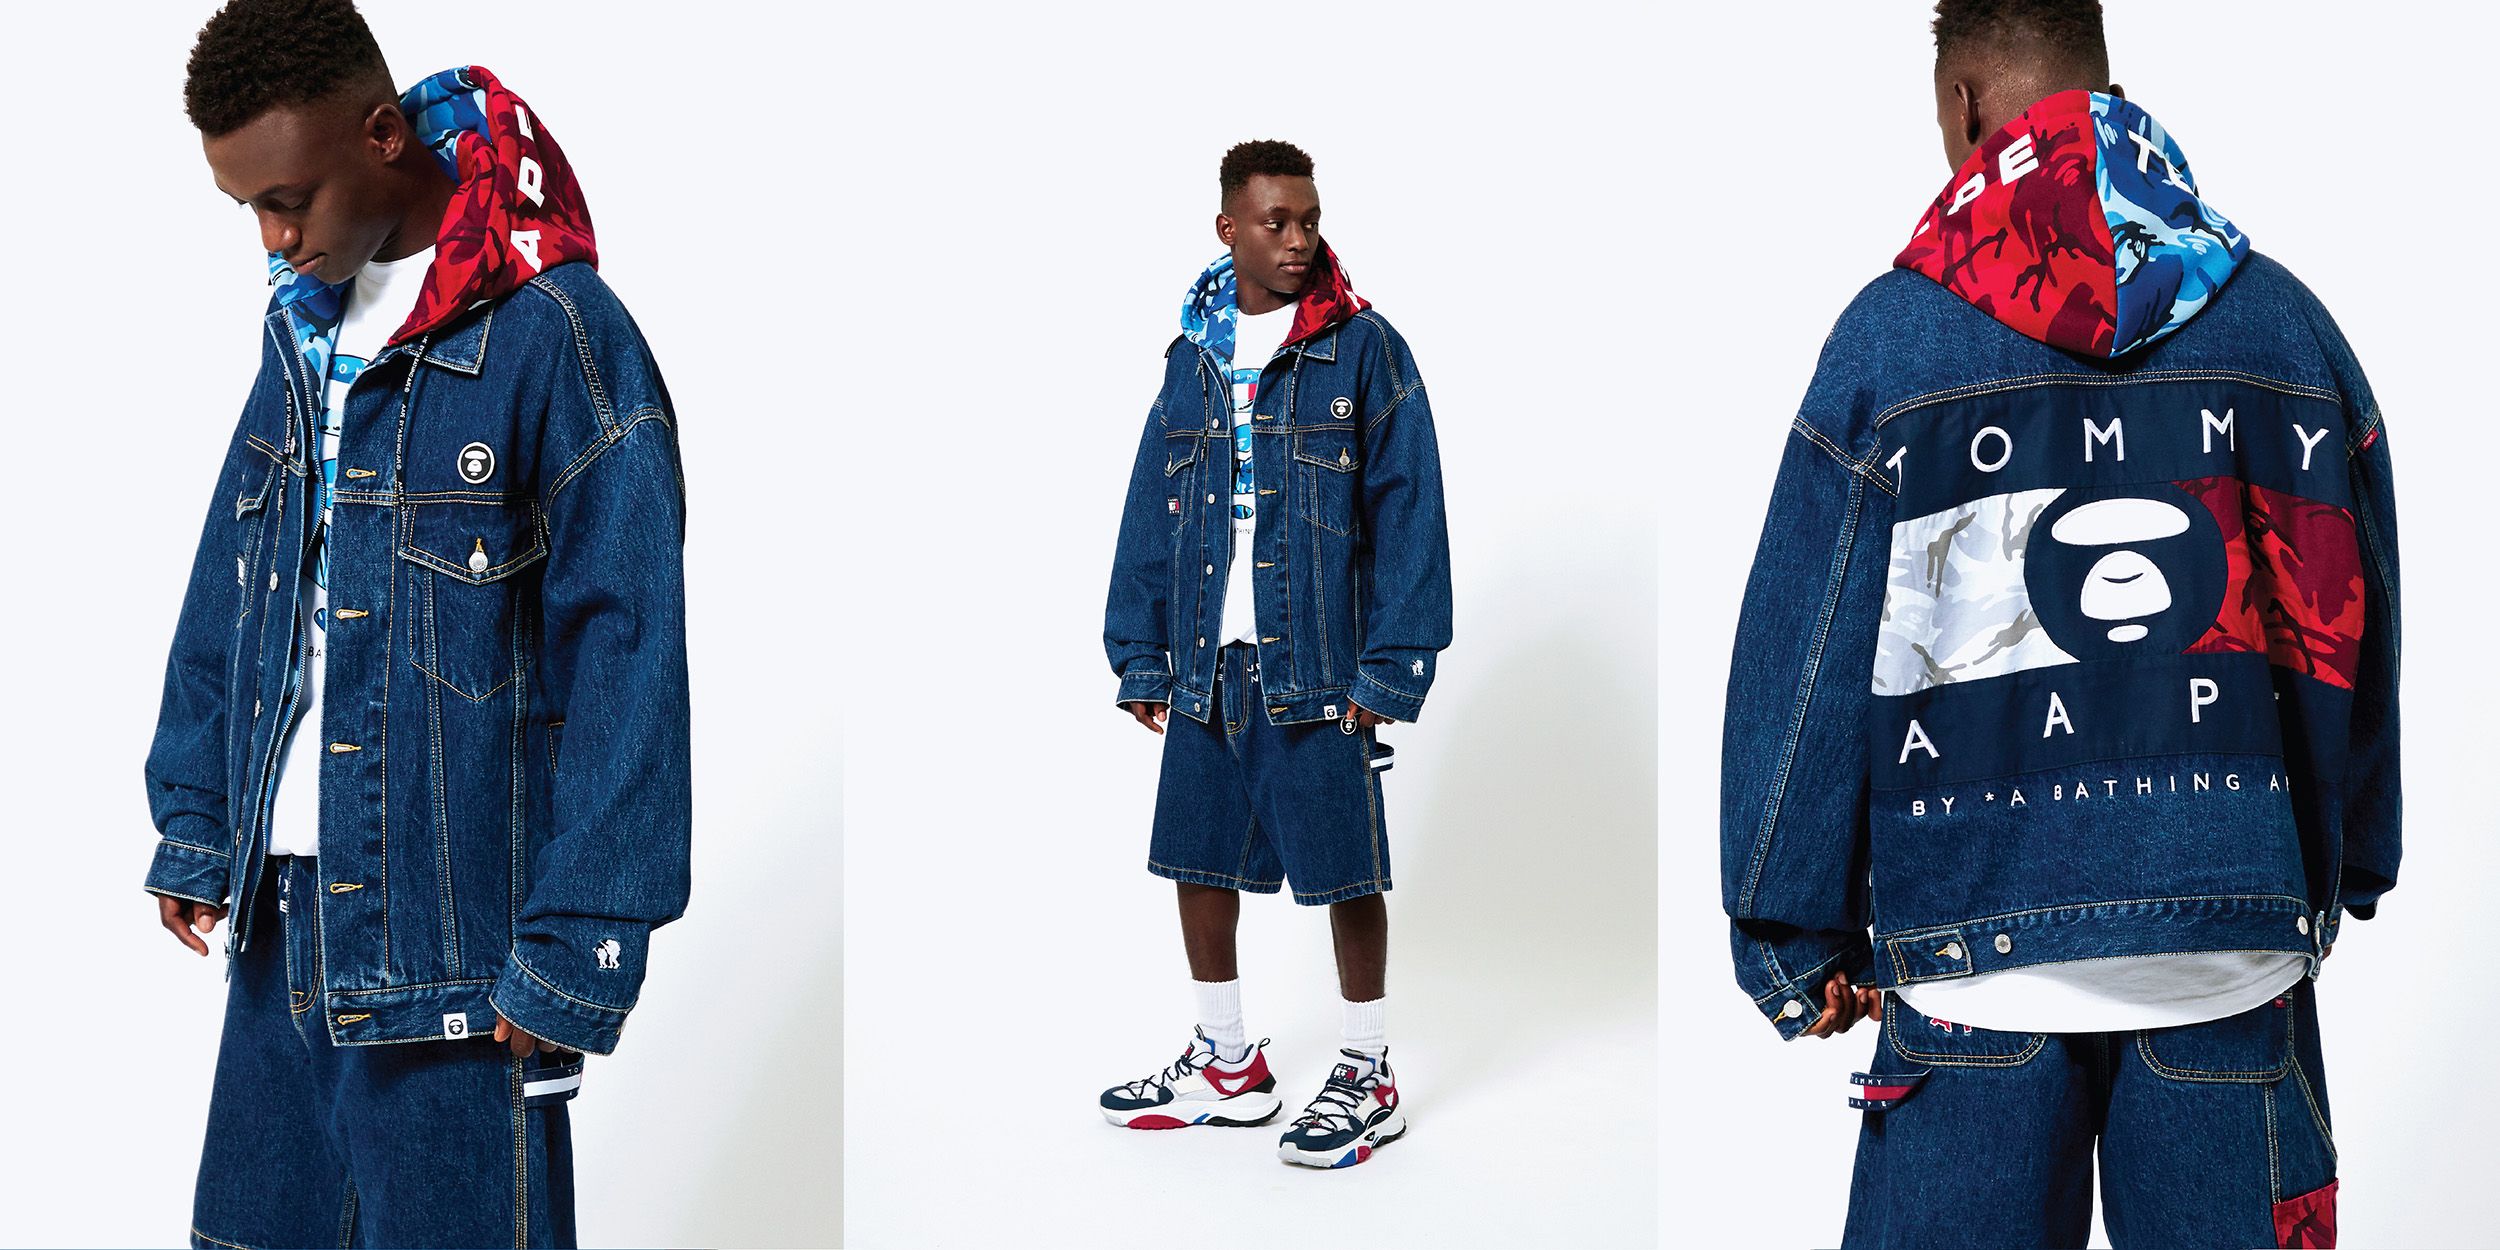 AAPE BY *A BATHING APE®とTommy Jeansによる初のコラボレーション